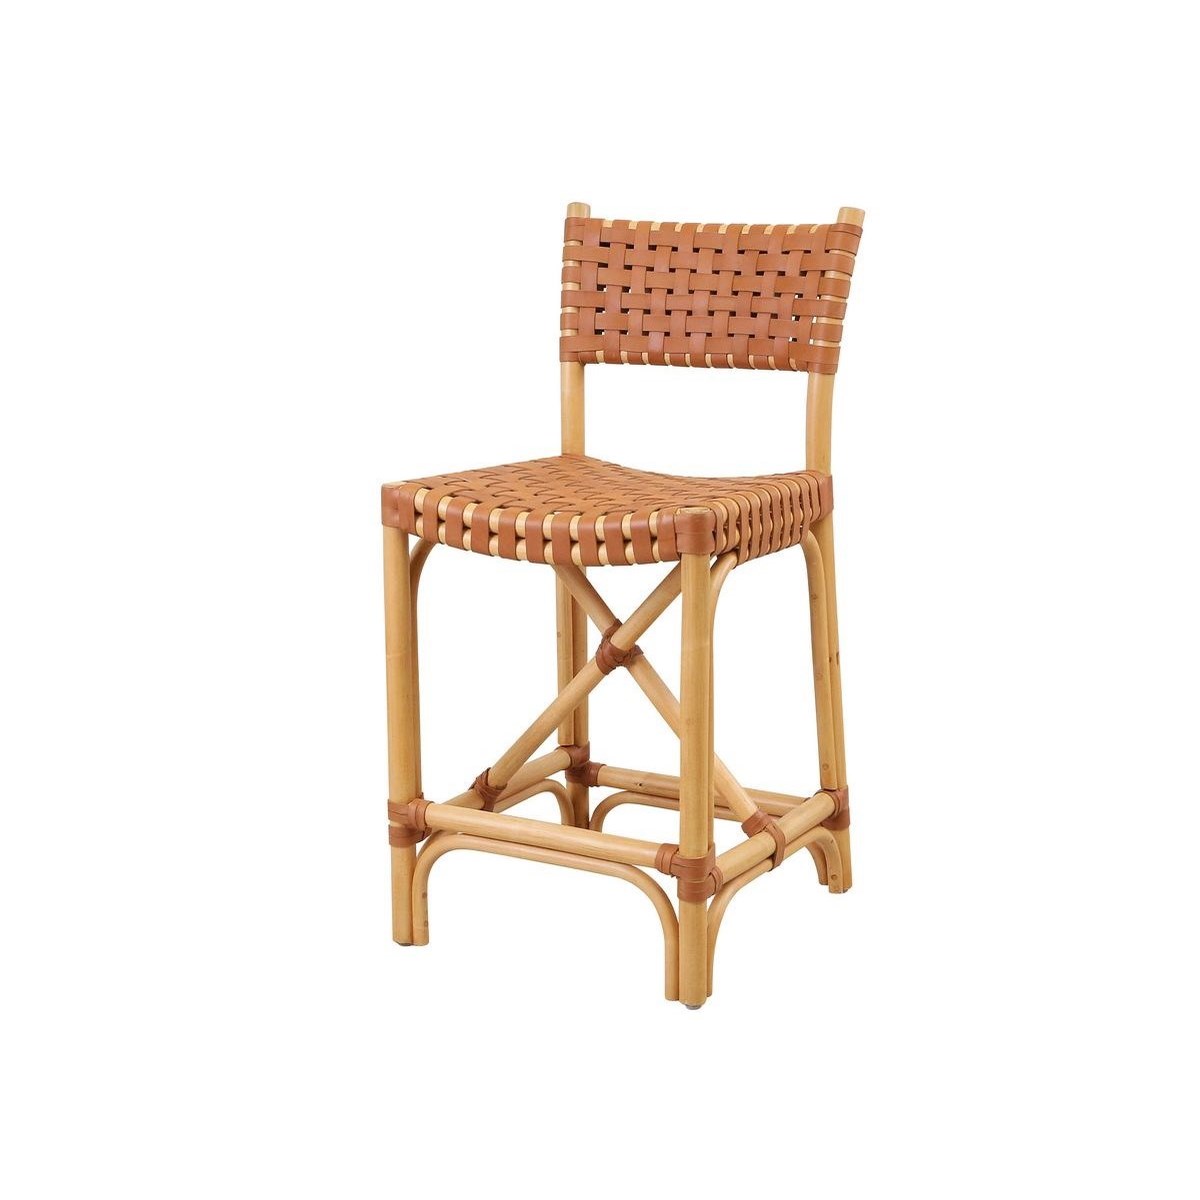 Malibu Counter Chair Frame Color - Natural Leather Color - Brown CLOSE-OUT - 50% OFF!SOLD AS-IS